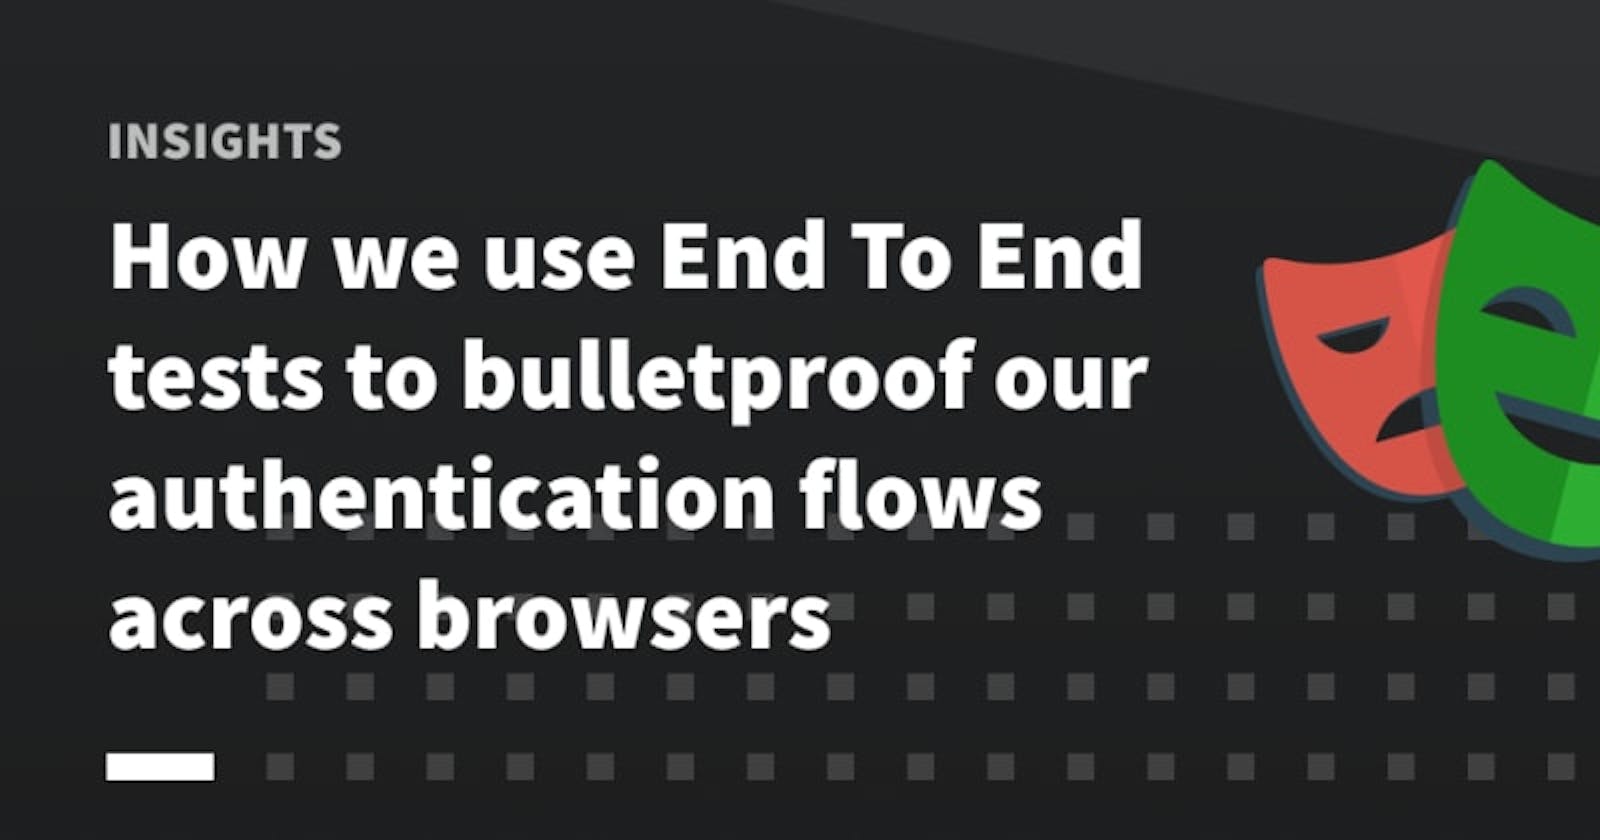 How we use End To End tests to bulletproof our authentication flows across browsers